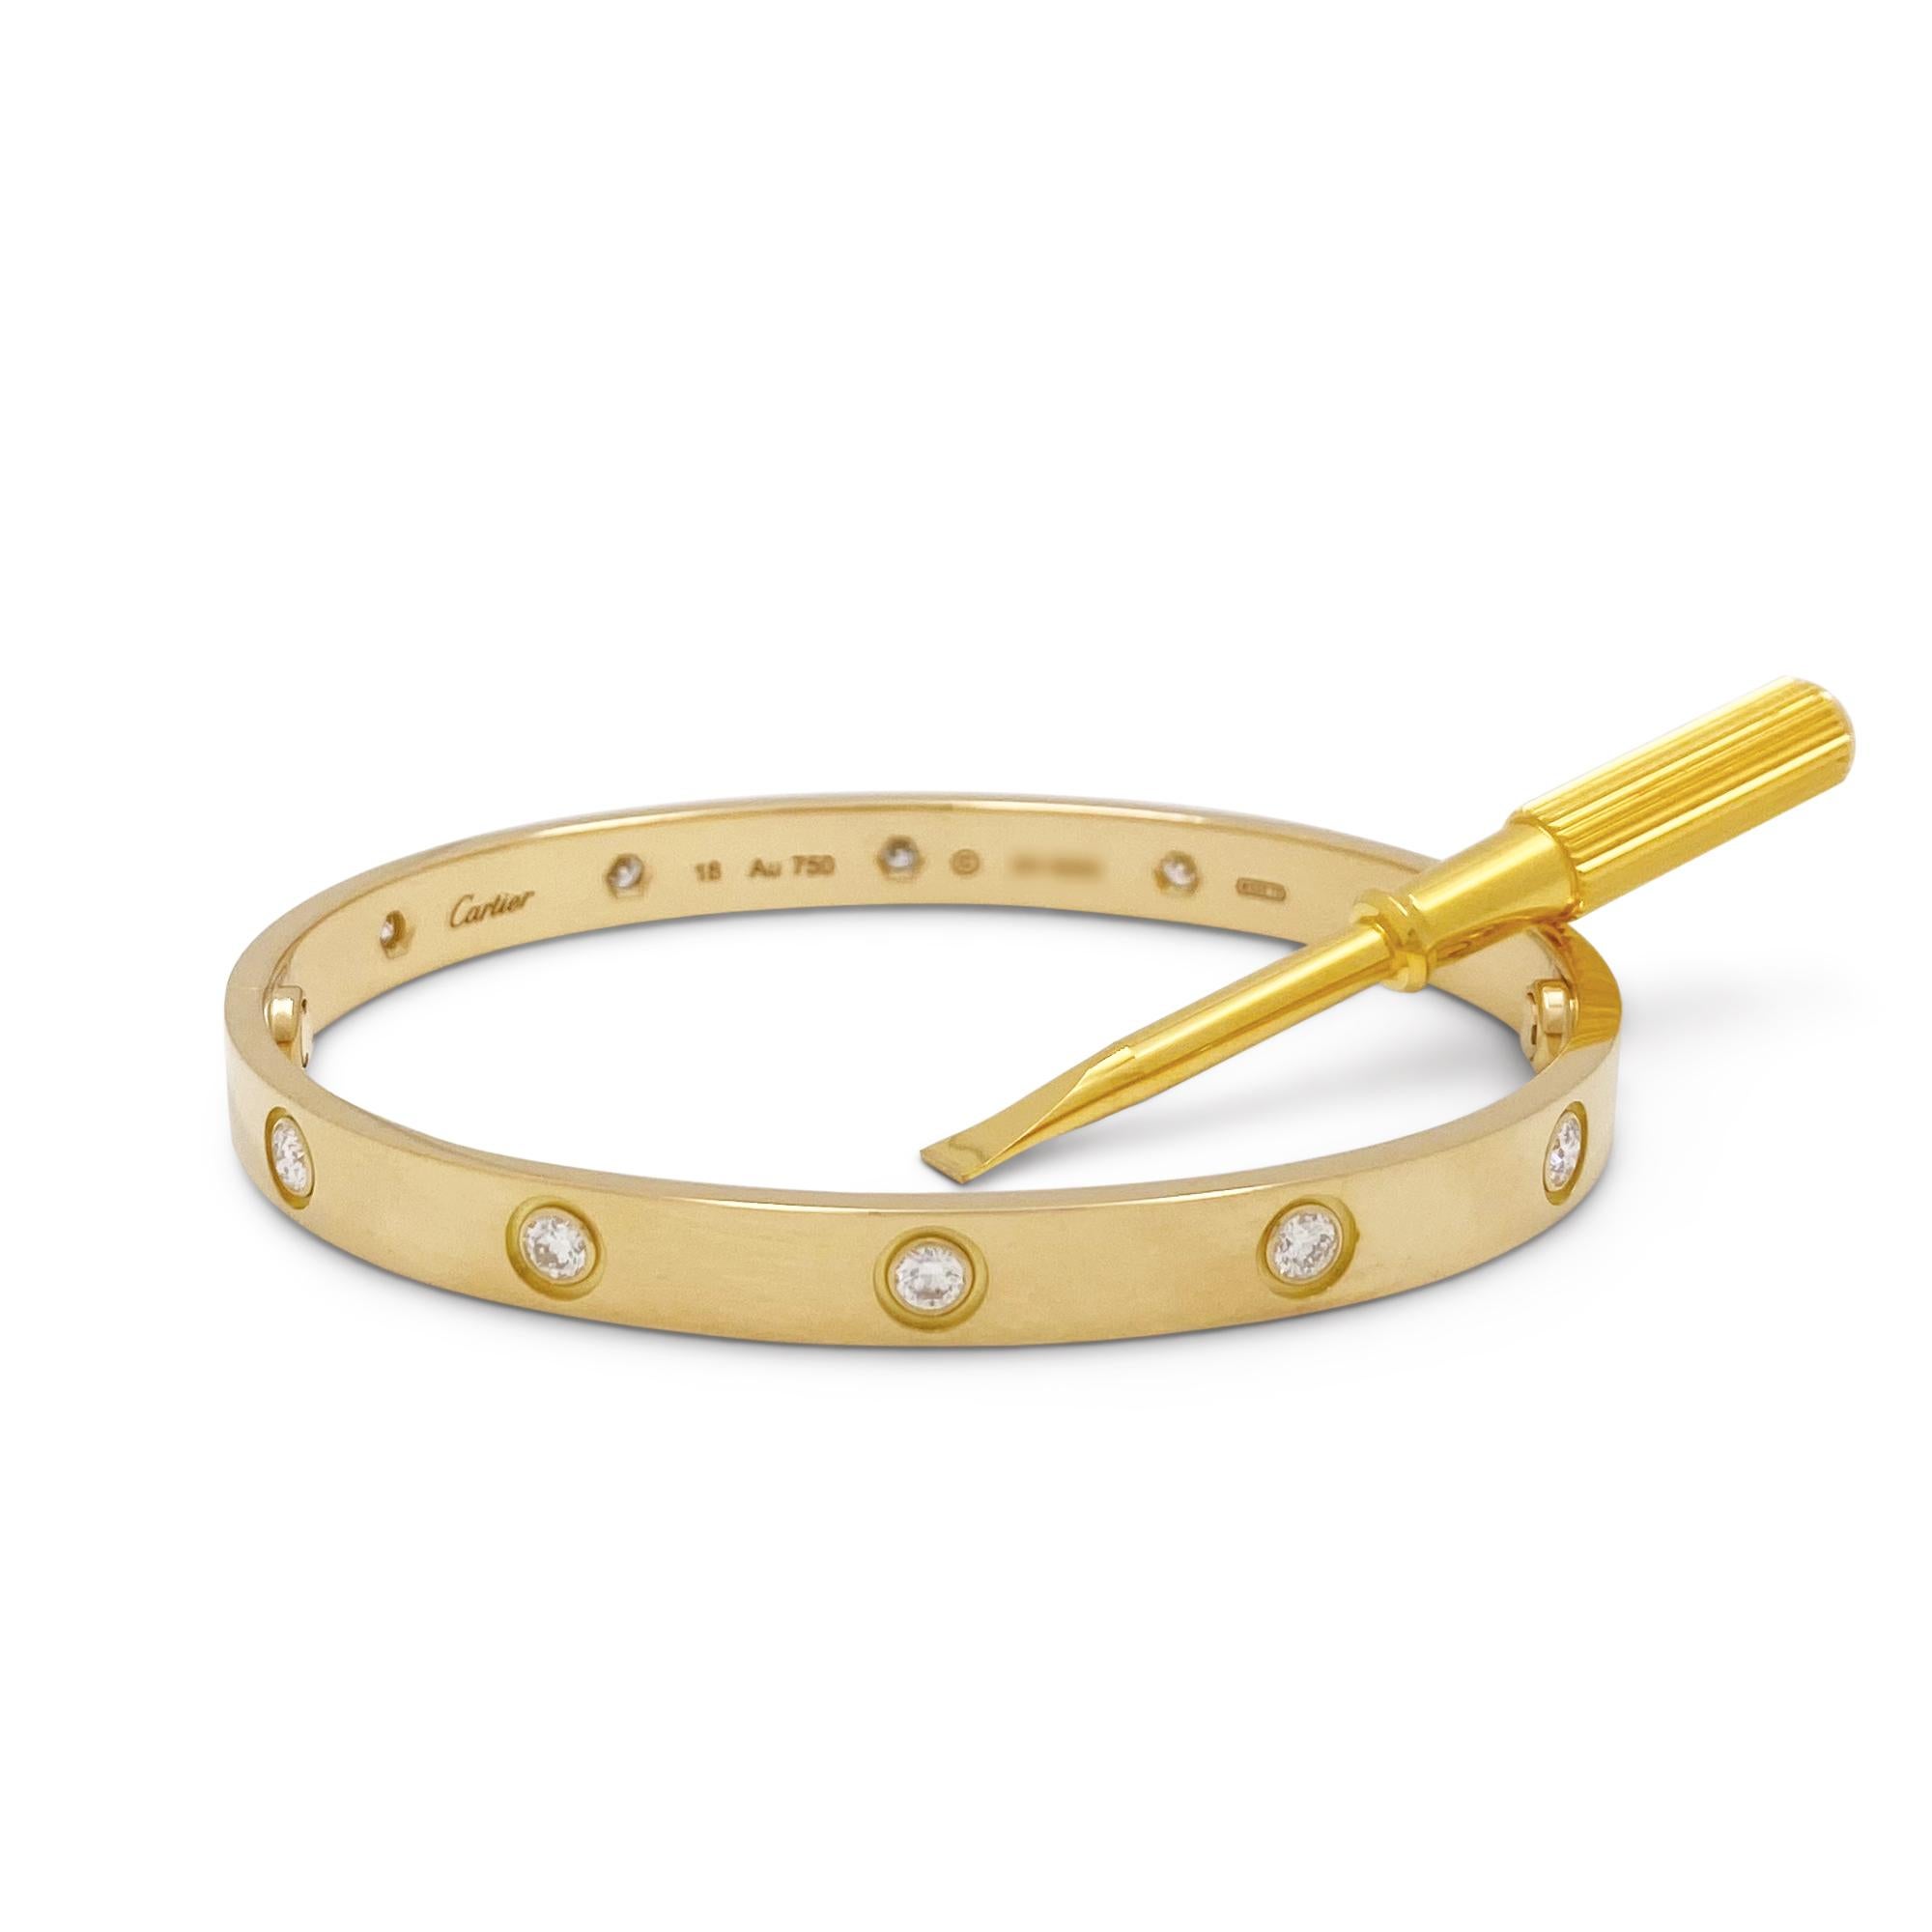 Authentic Cartier 'Love' bracelet crafted in 18 karat yellow gold is set with ten round brilliant cut diamonds (E-F, VS) weighing 0.42 carats total. Size18.  Signed Cartier, Au750, 18, with serial number and hallmark. The bracelet is presented with